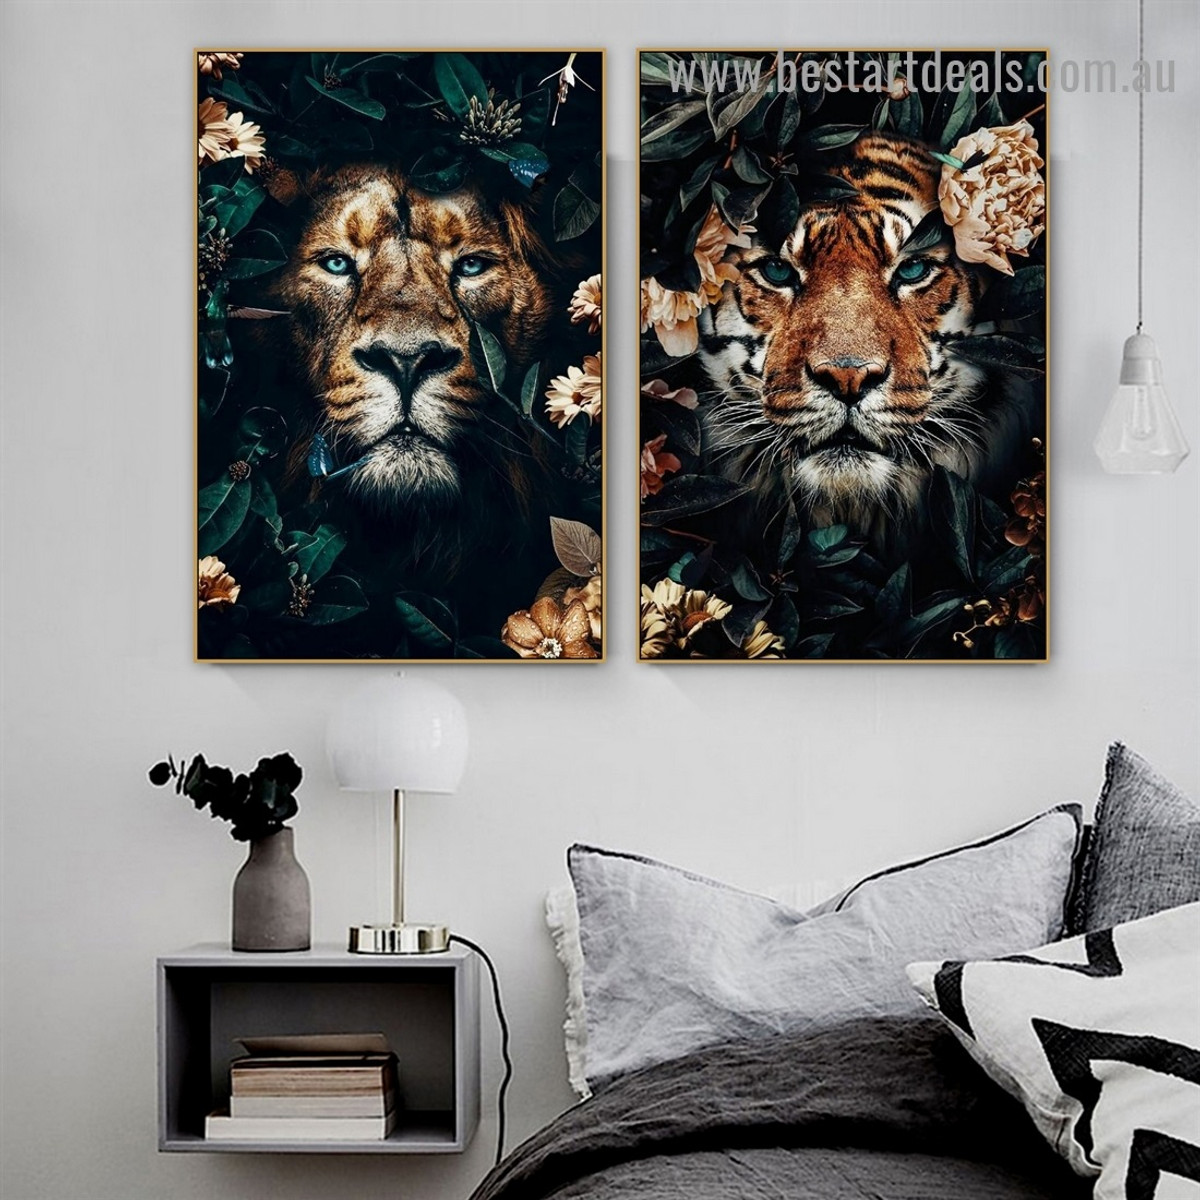 Shiny Eyes Tiger Animal Modern Artwork Picture Canvas Print for Room Wall Adornment